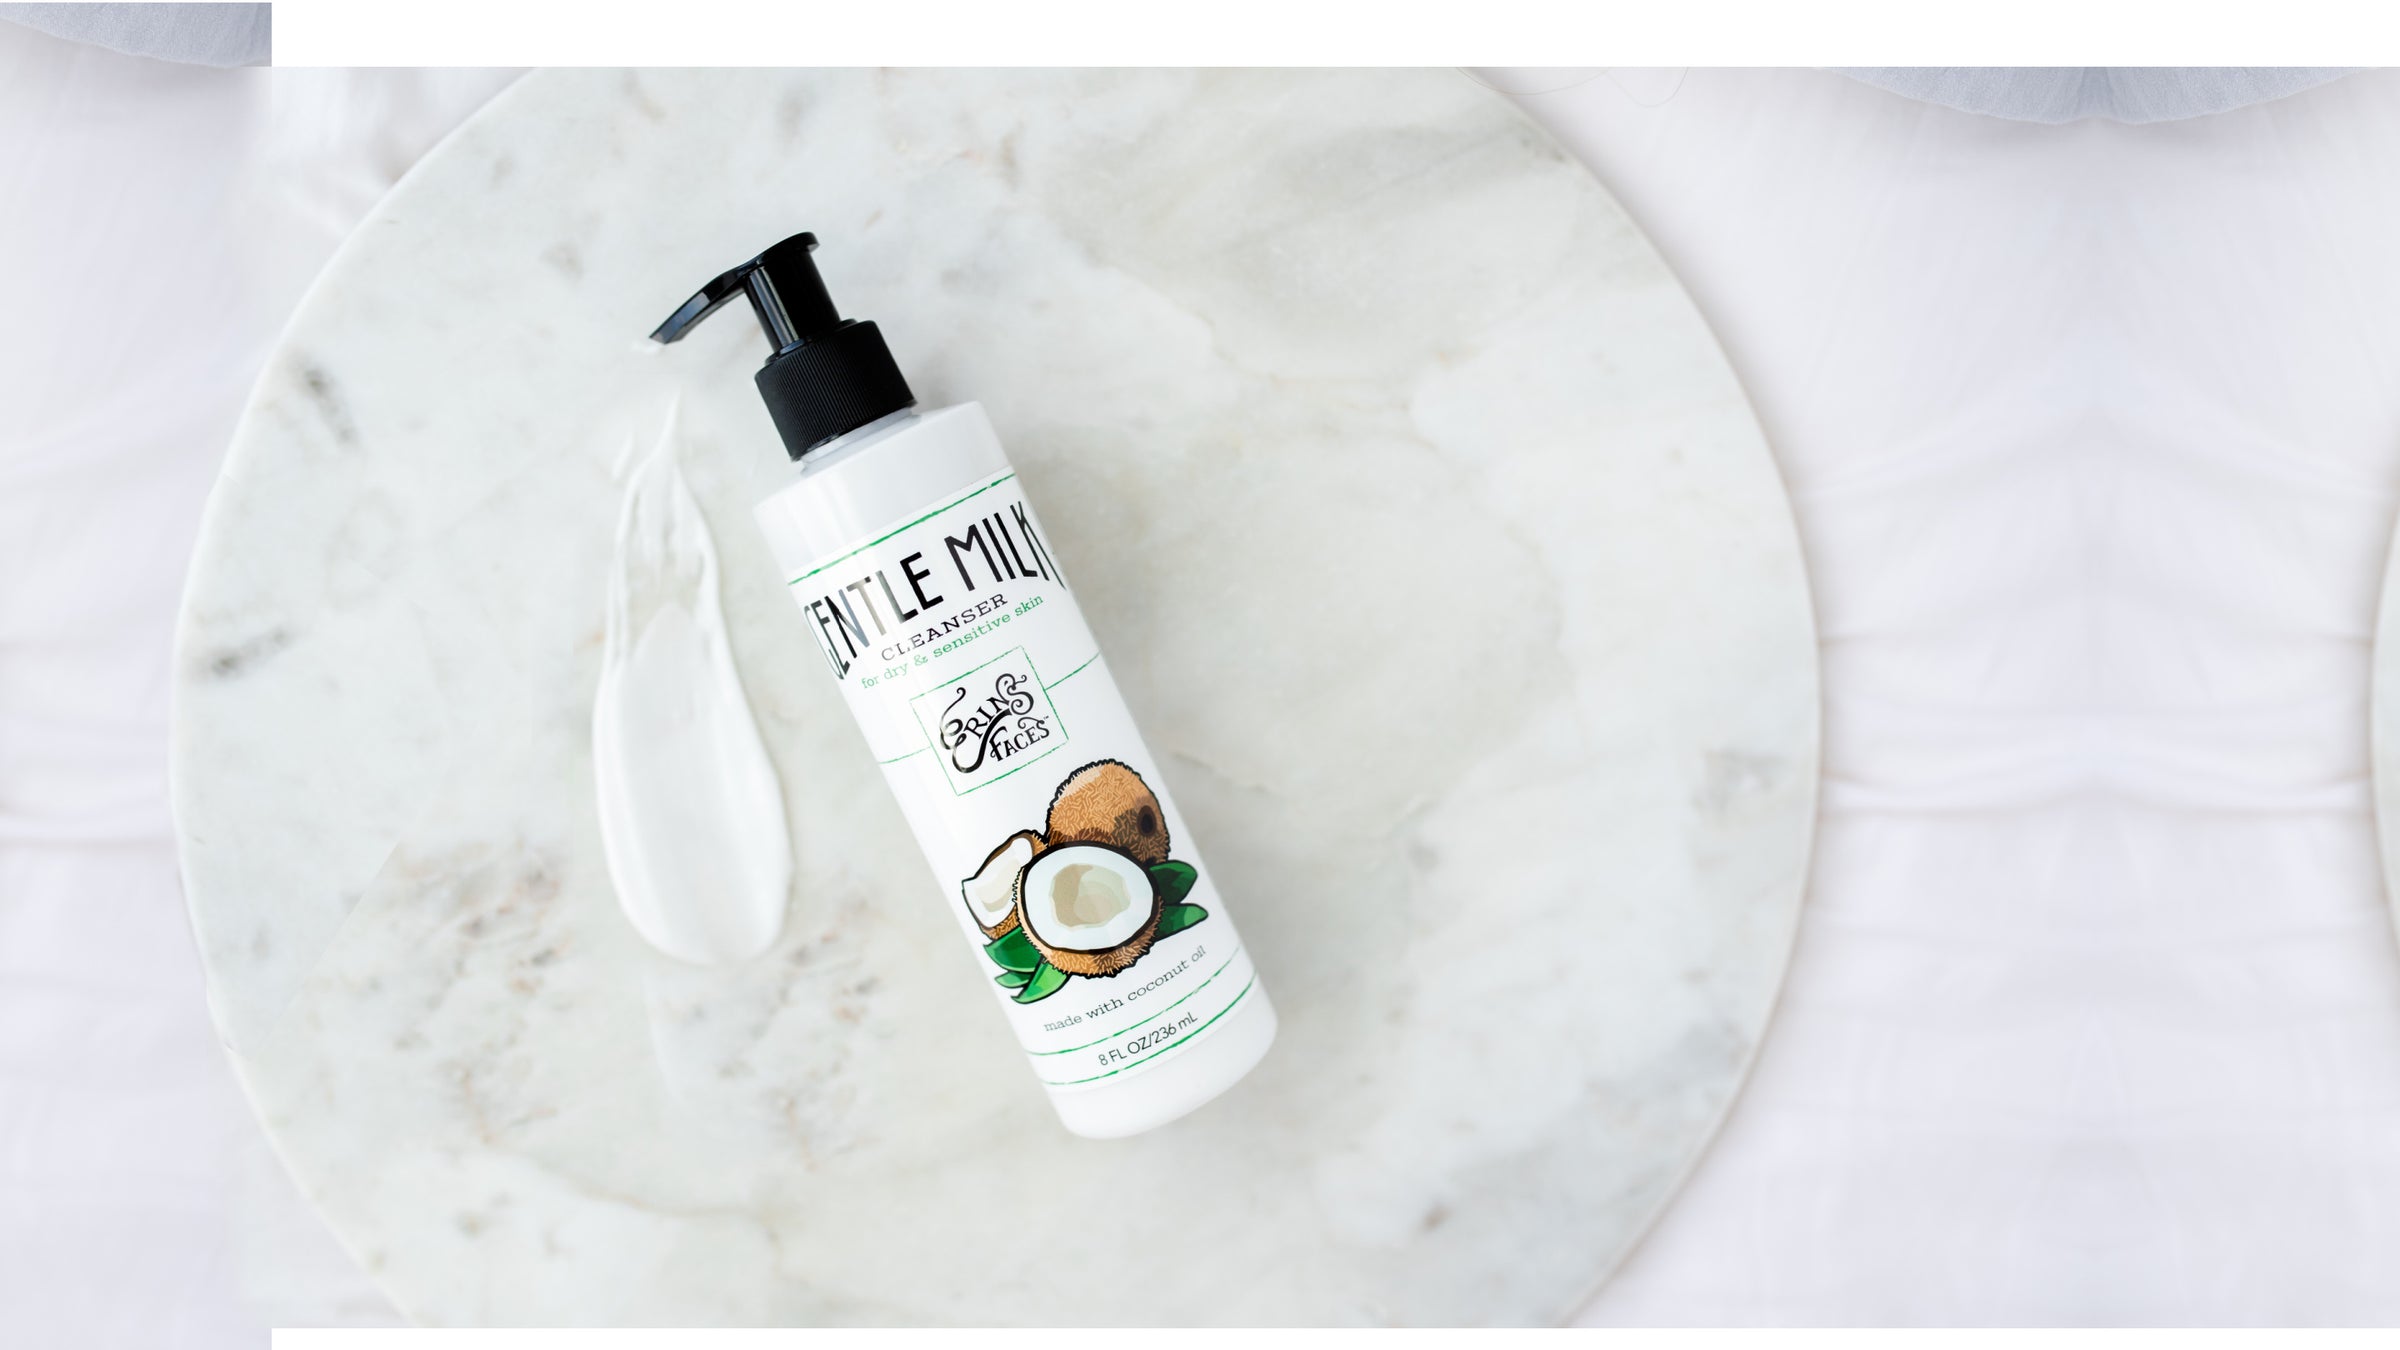 erin's faces gentle milk cleanser - bottle is white with coconut illustration - on white marble circle with swipe of product which is also white